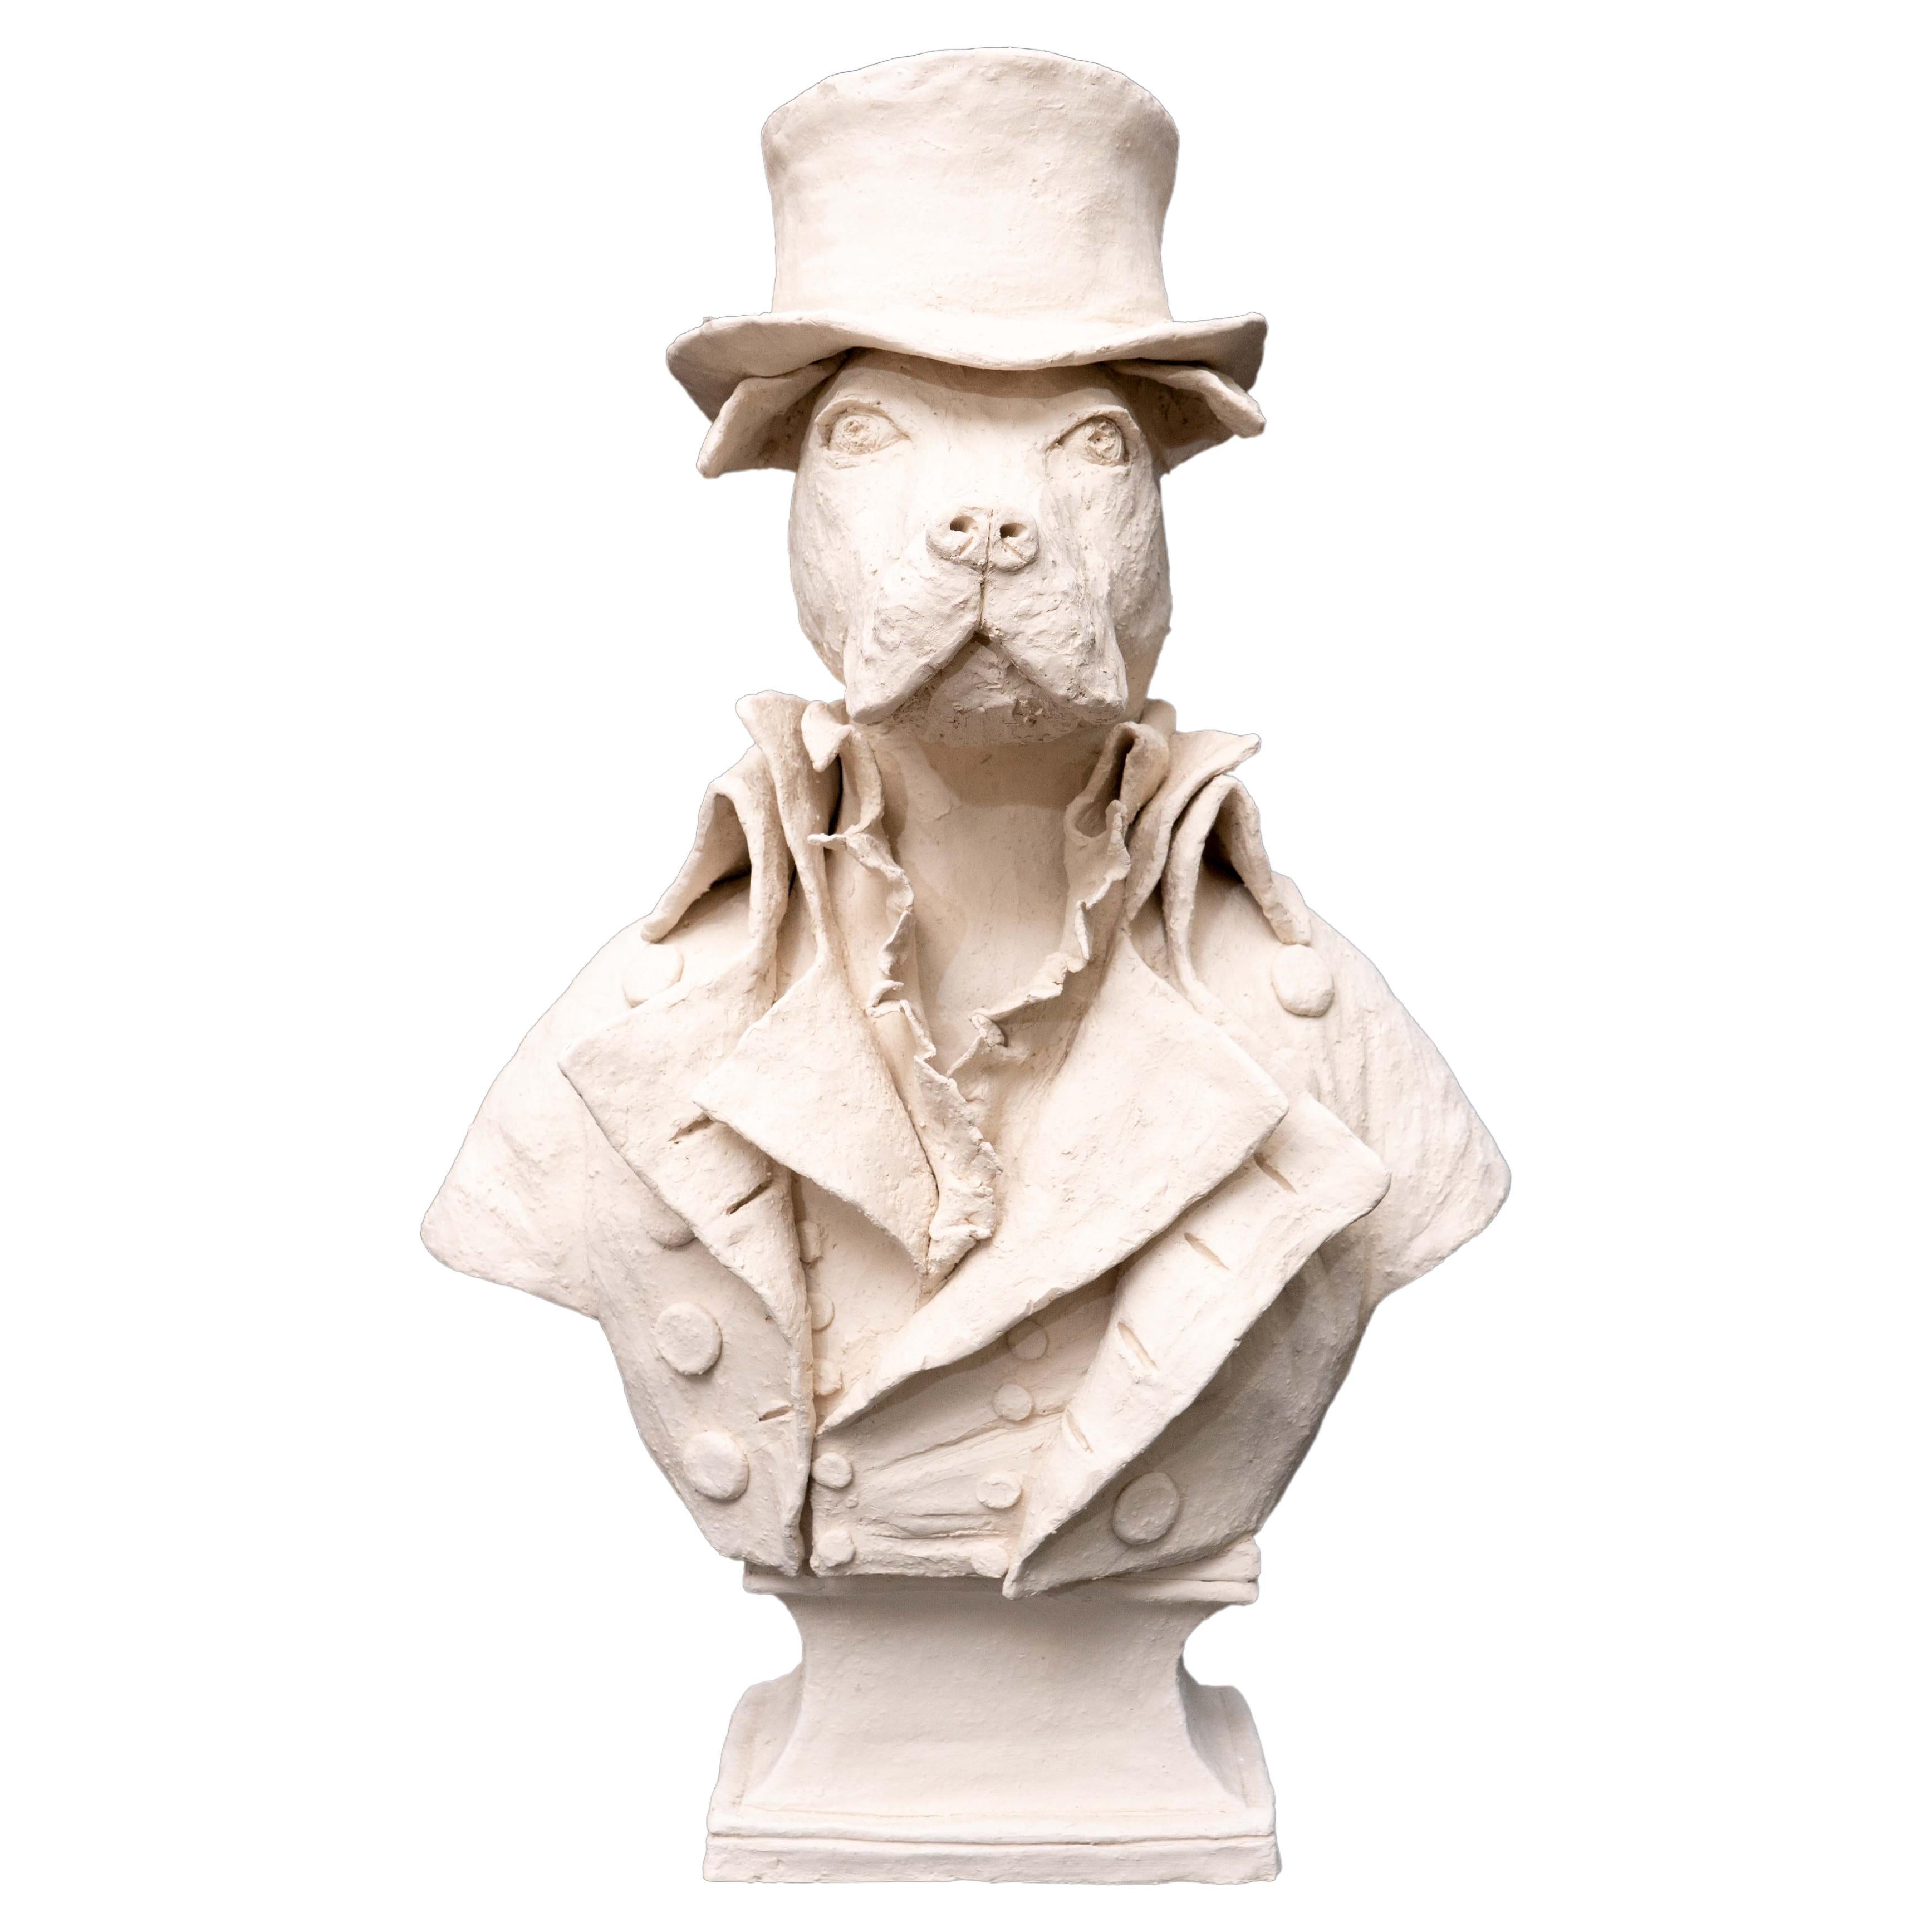 Large Terracotta Anthropomorphic Figure of a Dog Wearing a Top Hat